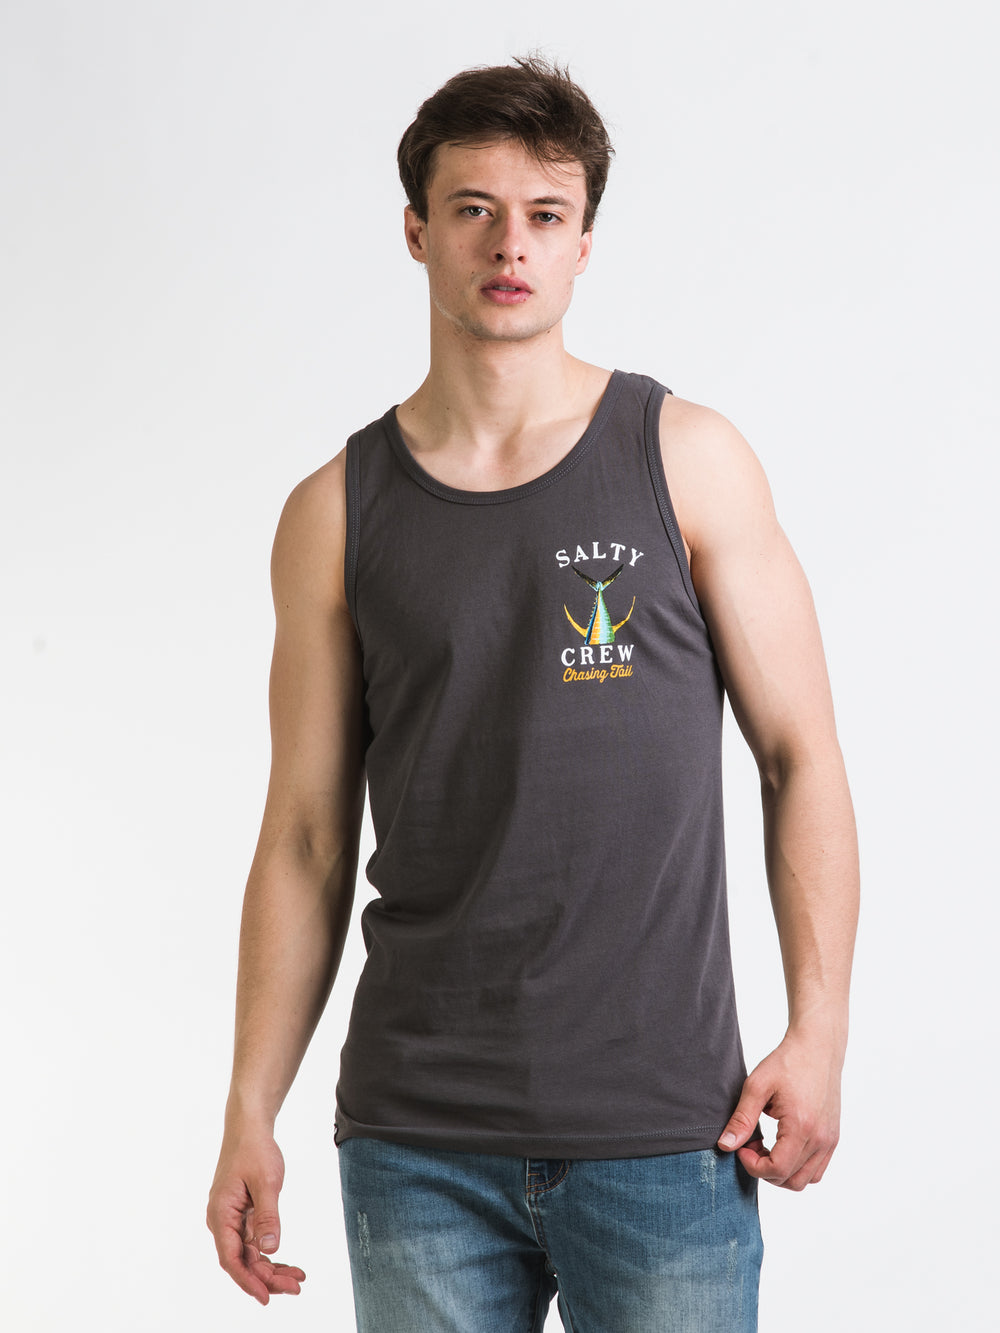 SALTY CREW TAILED Tank Top - CLEARANCE